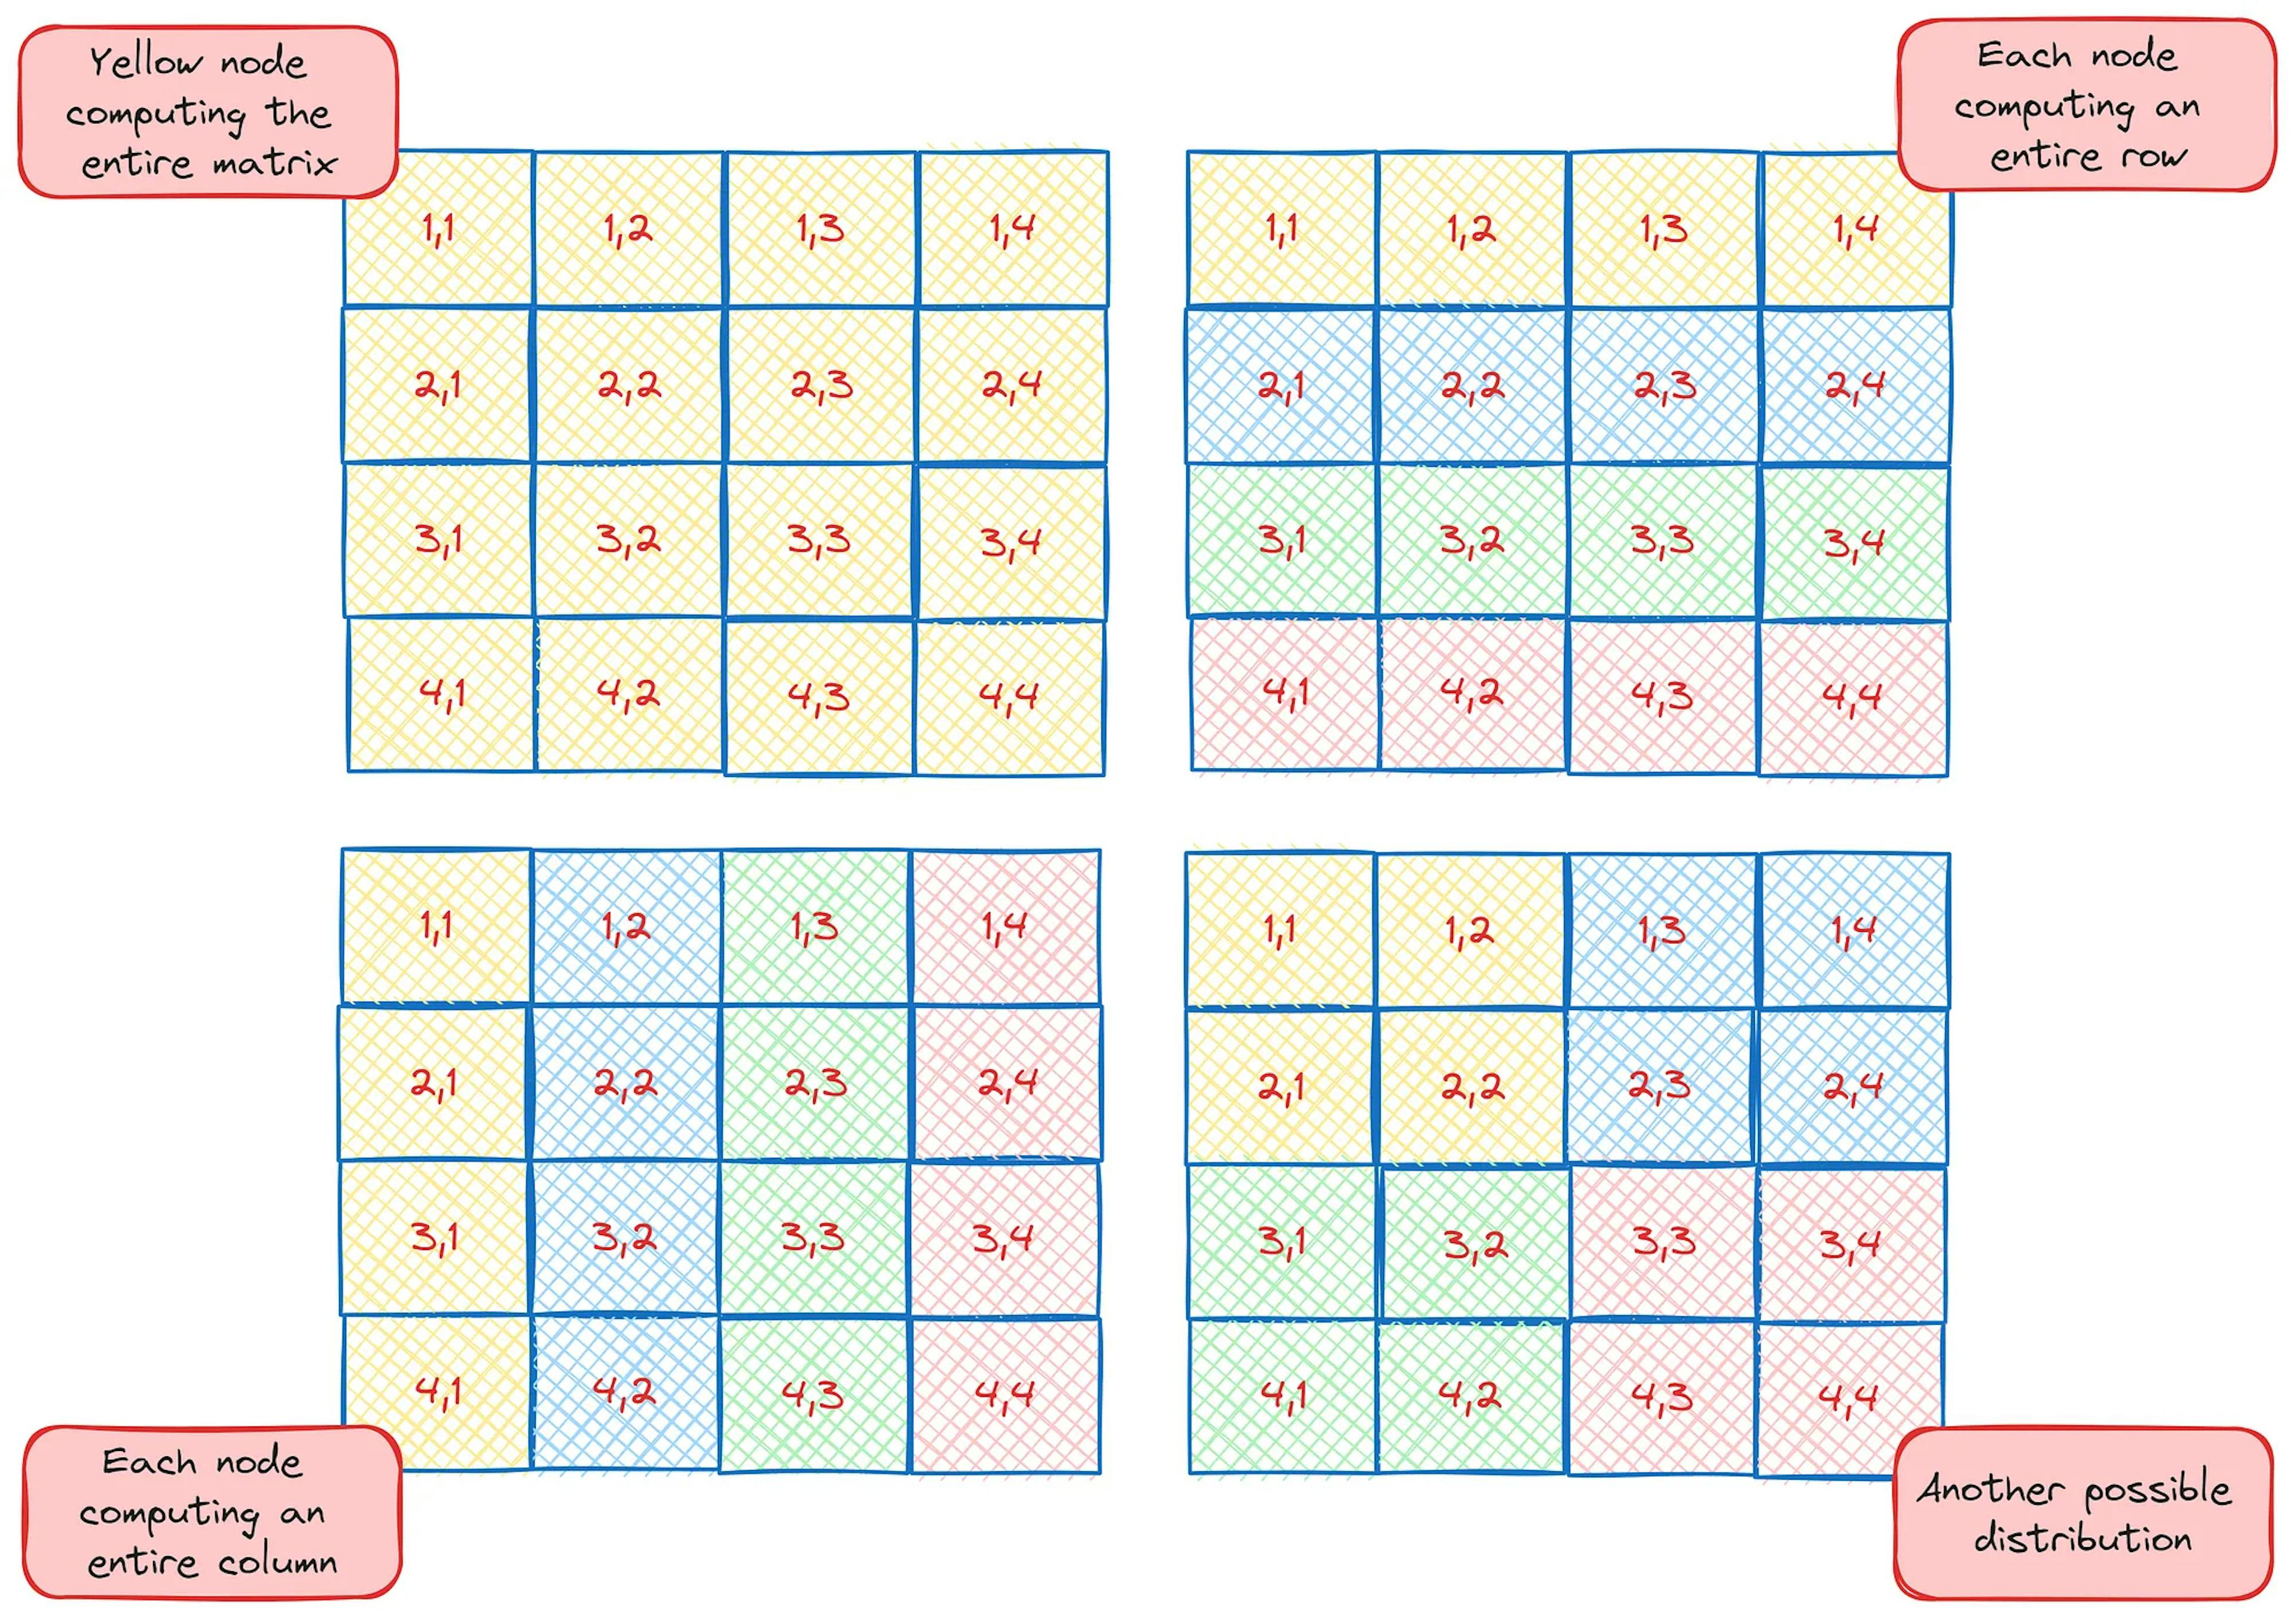 The background color identifies the node computing the corresponding element. Drawn by the author on Excalidraw